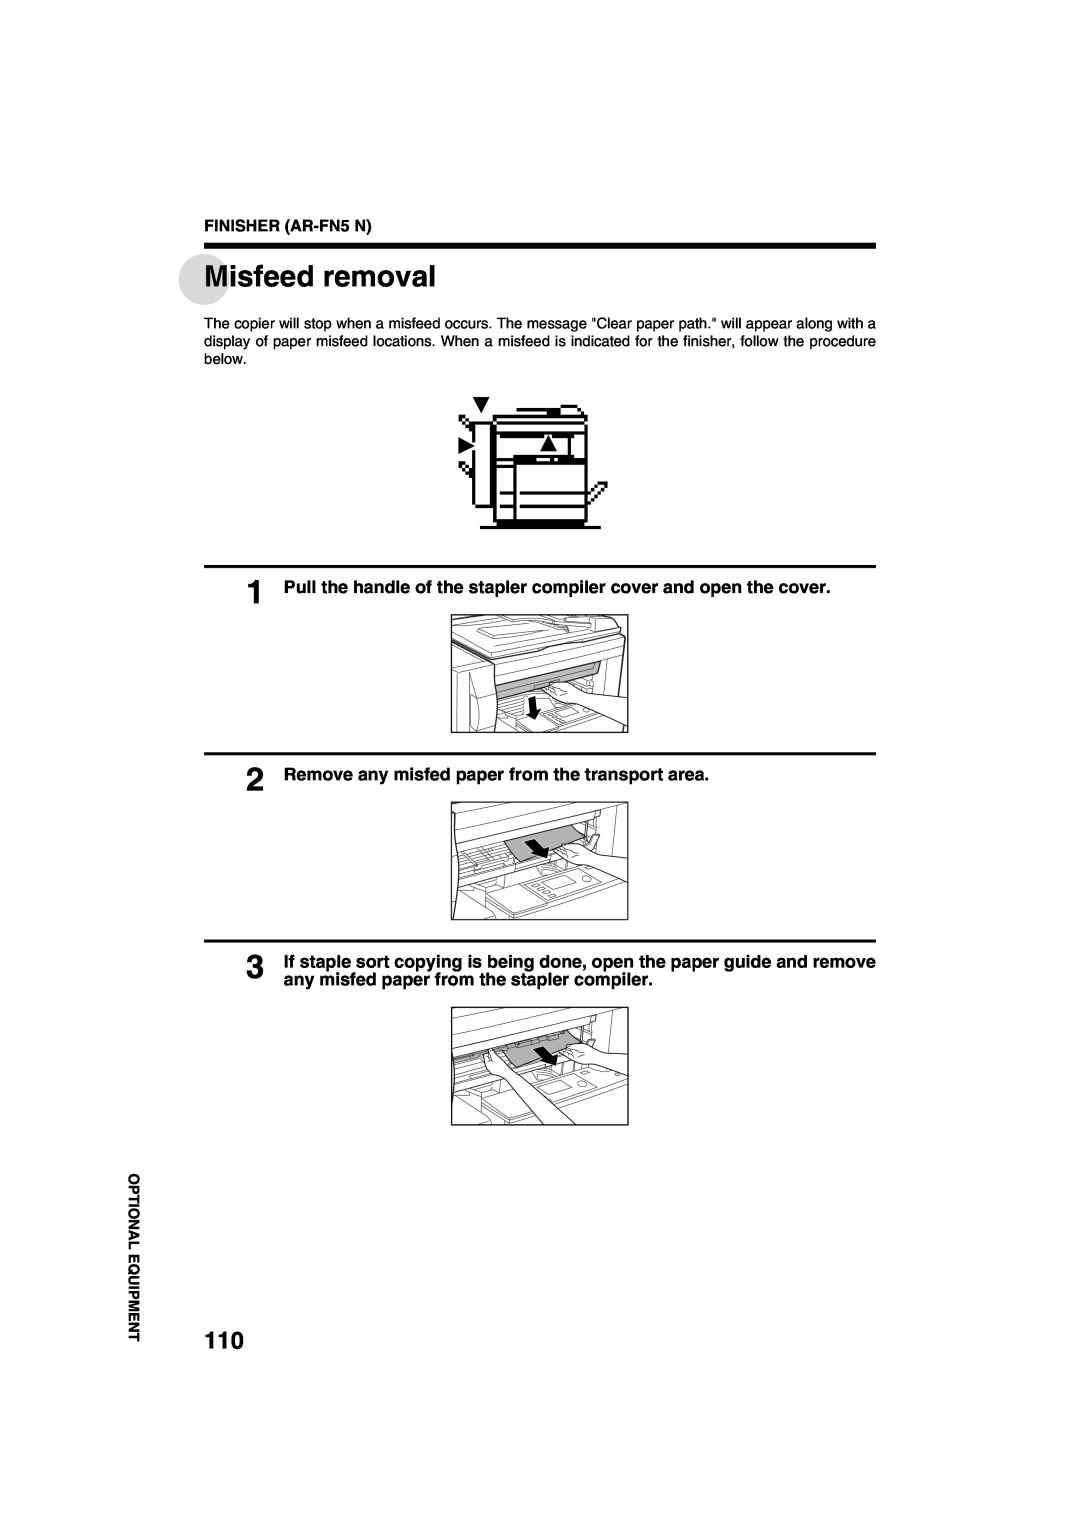 Sharp AR-M208 operation manual Misfeed removal, Pull the handle of the stapler compiler cover and open the cover 